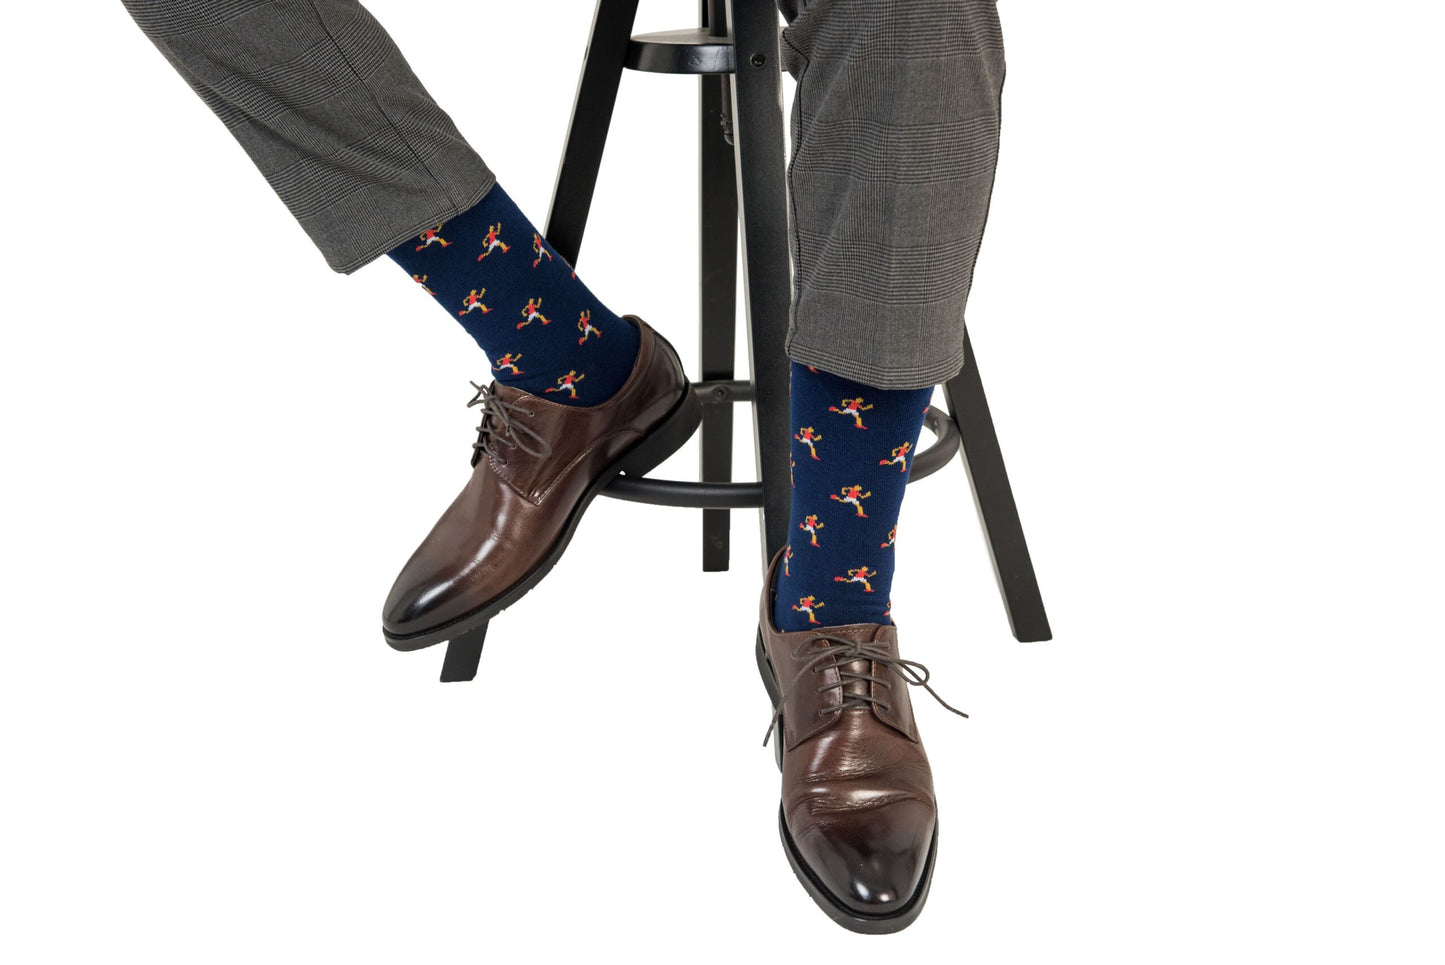 A man is sitting on a stool wearing a pair of Athletics Socks.